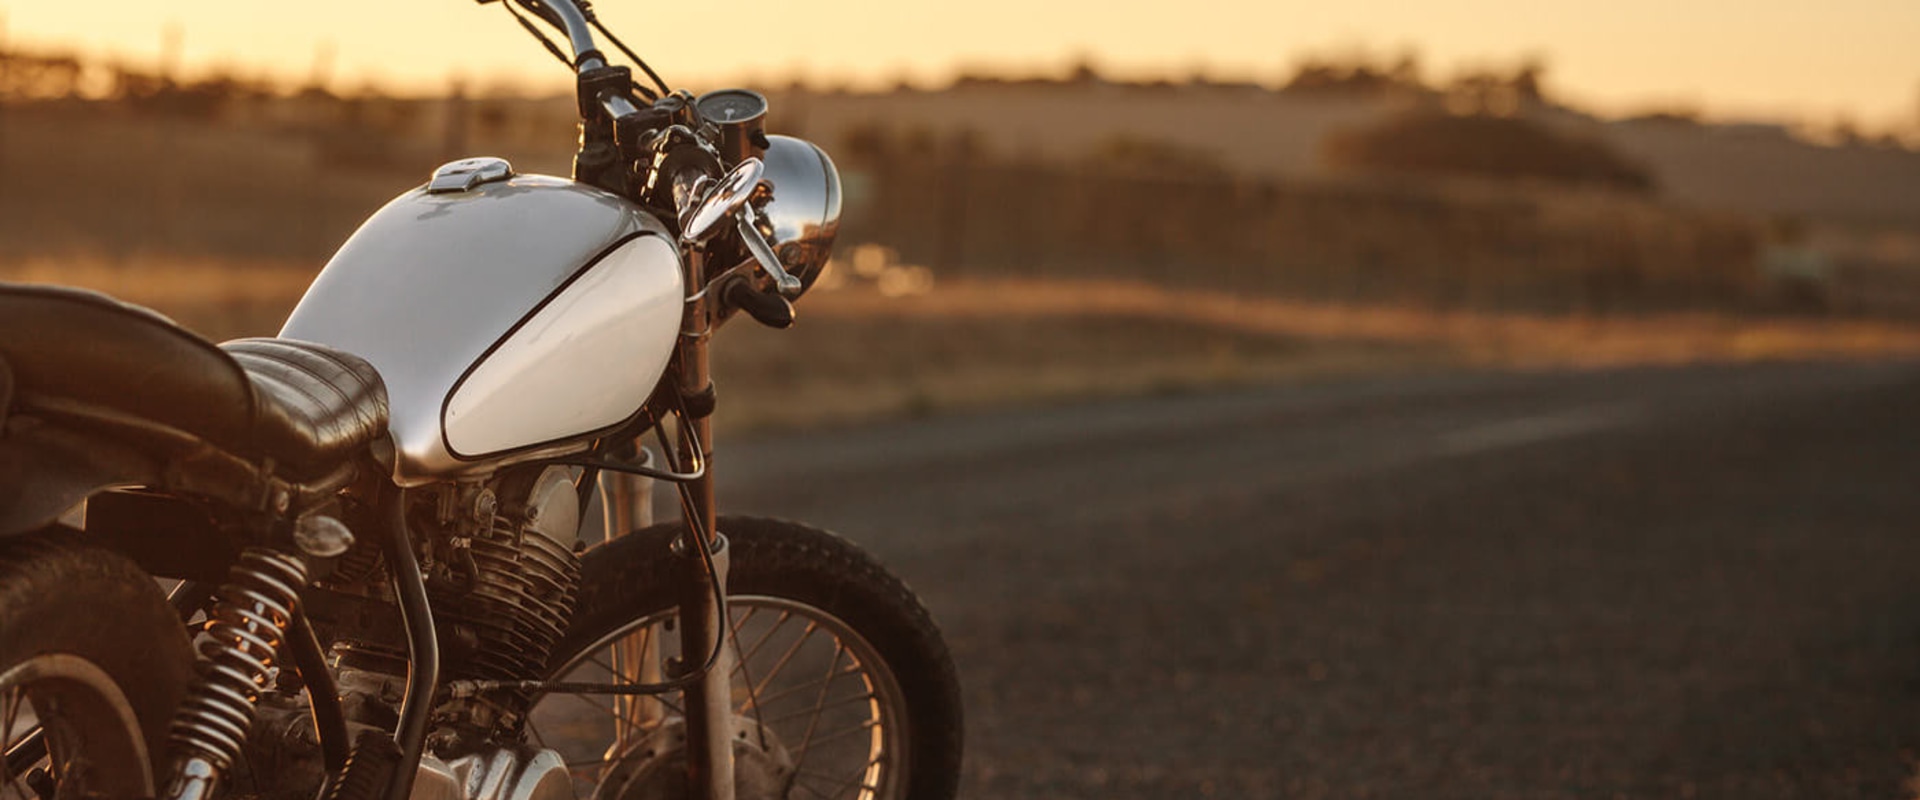 Does Motorcycle Insurance Cover Custom and Antique Vehicles?